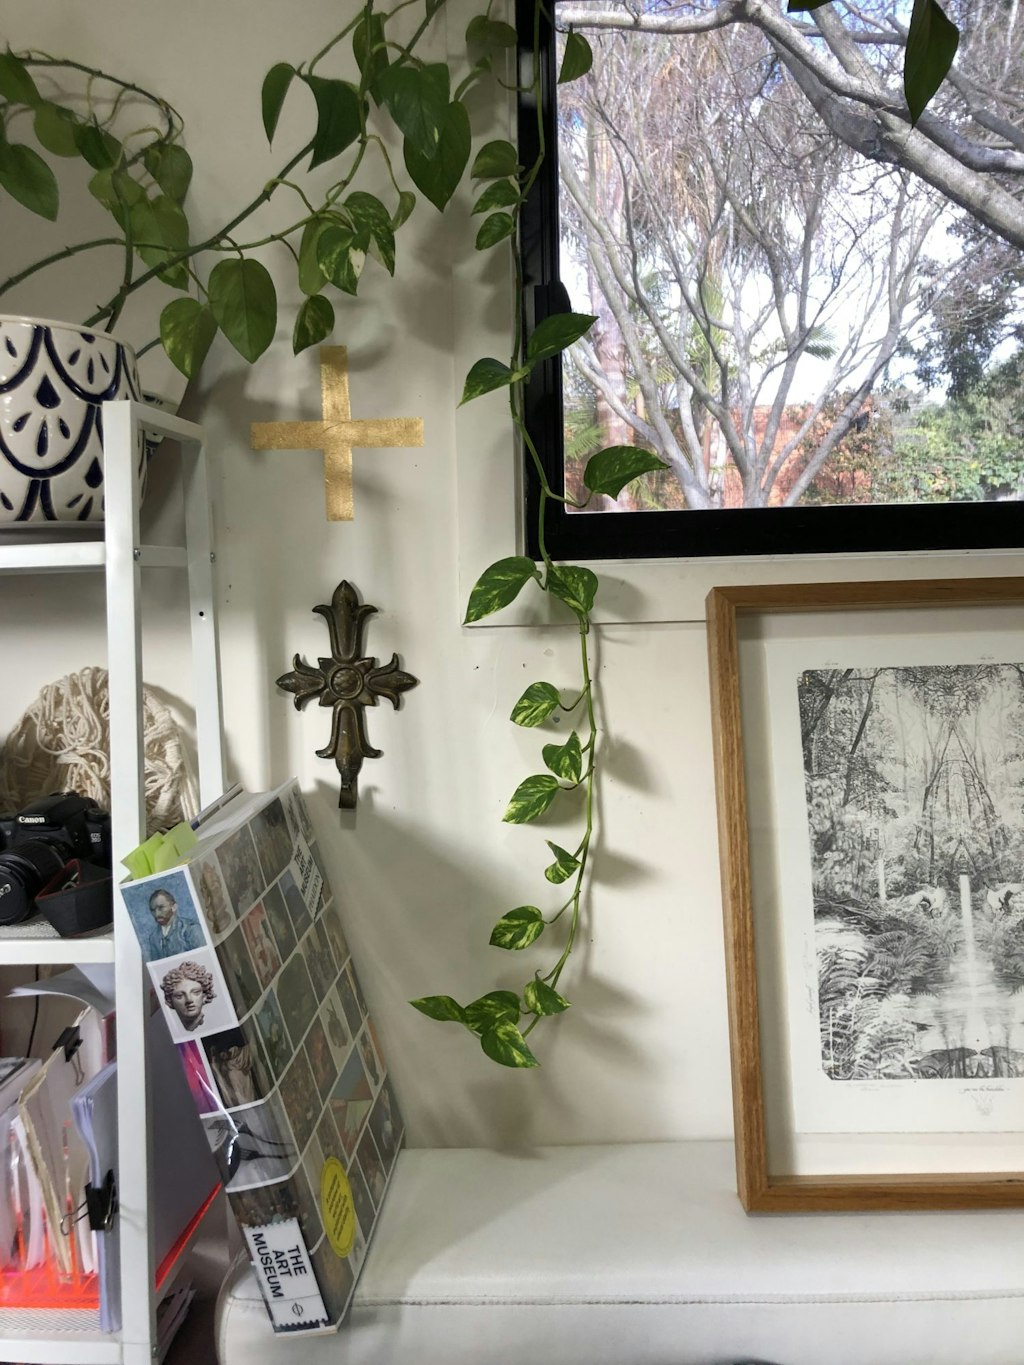 A shelving unit holds objects including a pot plant trailing leaves. Between the unit and a window, two crucifixes hang on a wall. A book and a framed artwork sit on a piece of furniture.